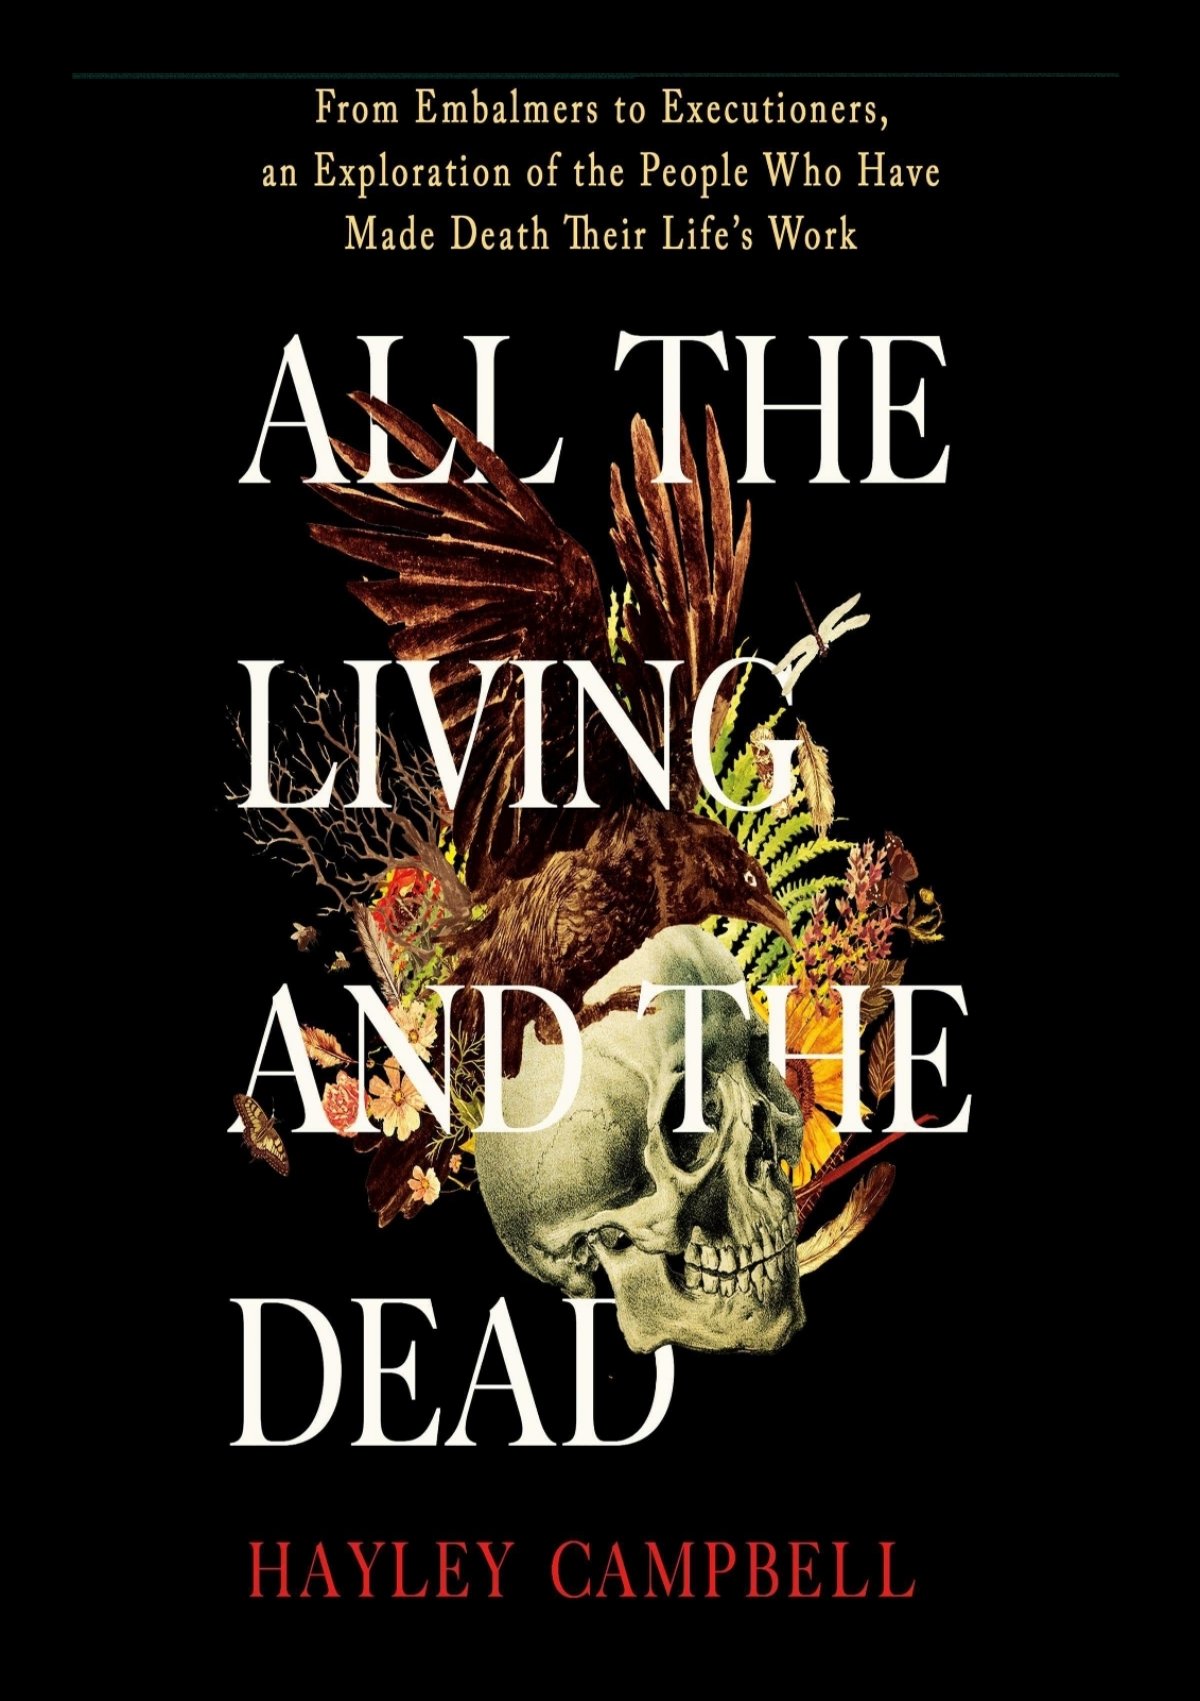 Download⚡️(PDF) ️ All the Living and the Dead: From Embalmers to ...